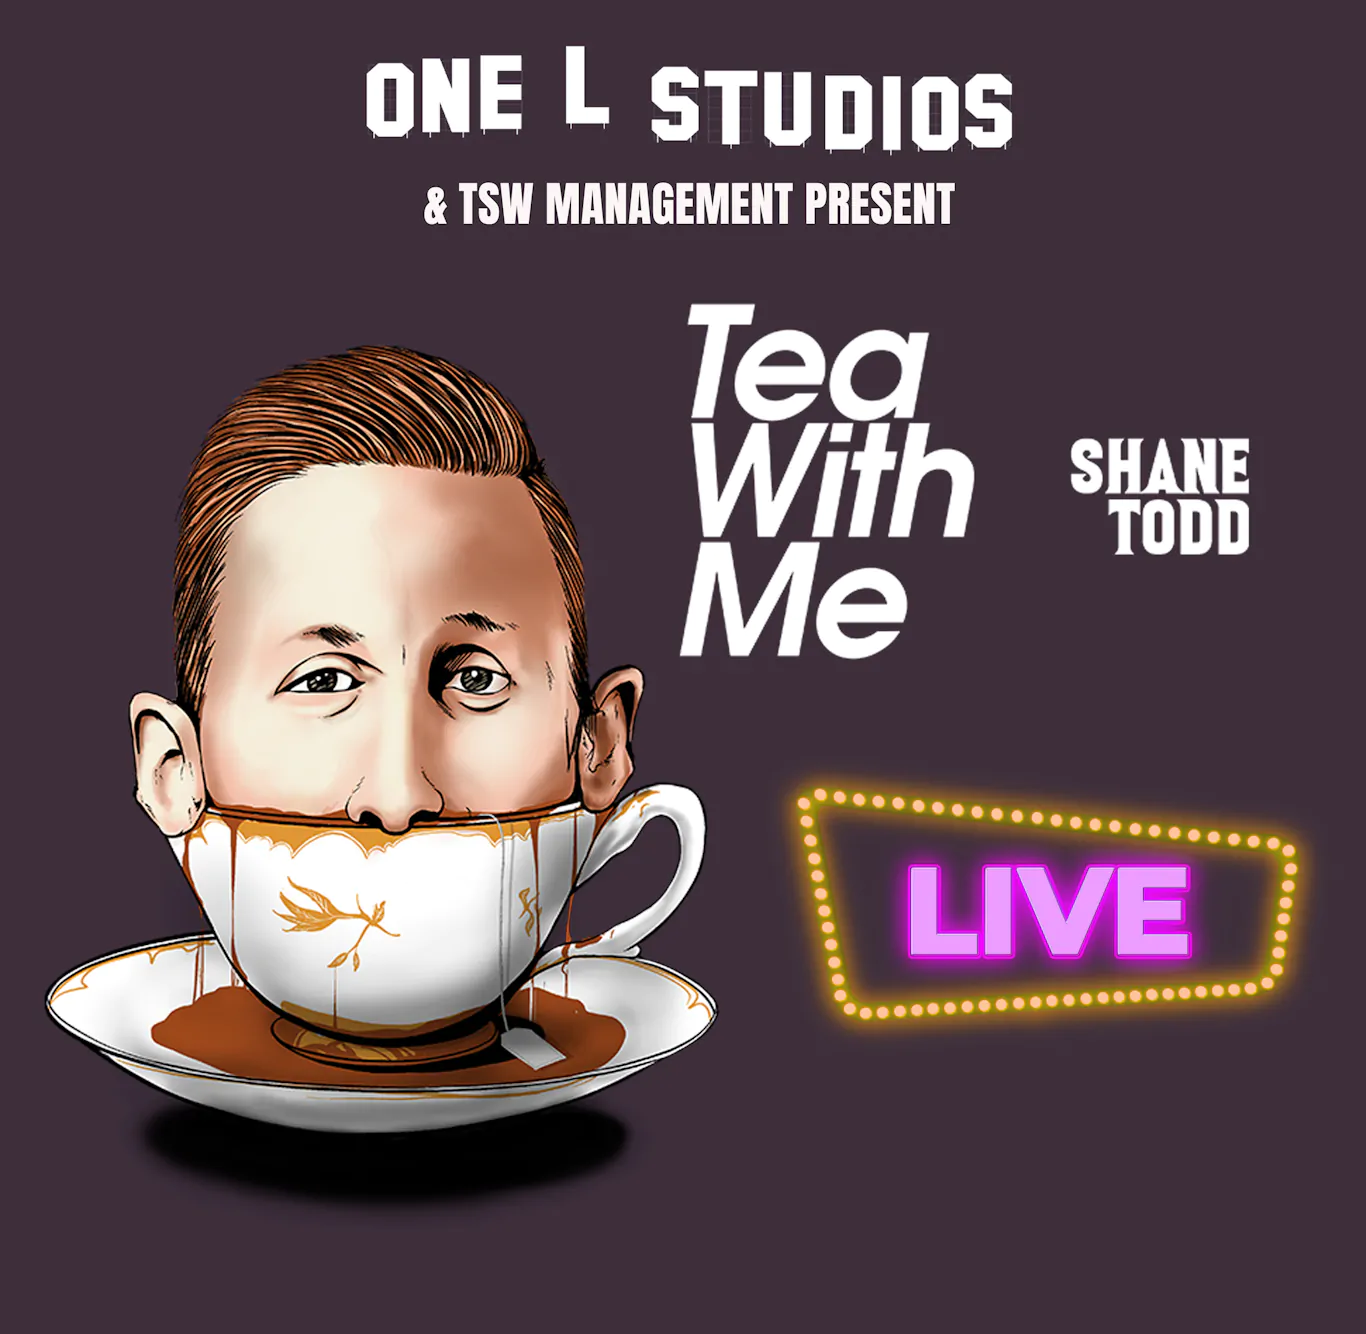 SHANE TODD brings his hugely popular Tea With Me podcast to the SSE Arena, Belfast